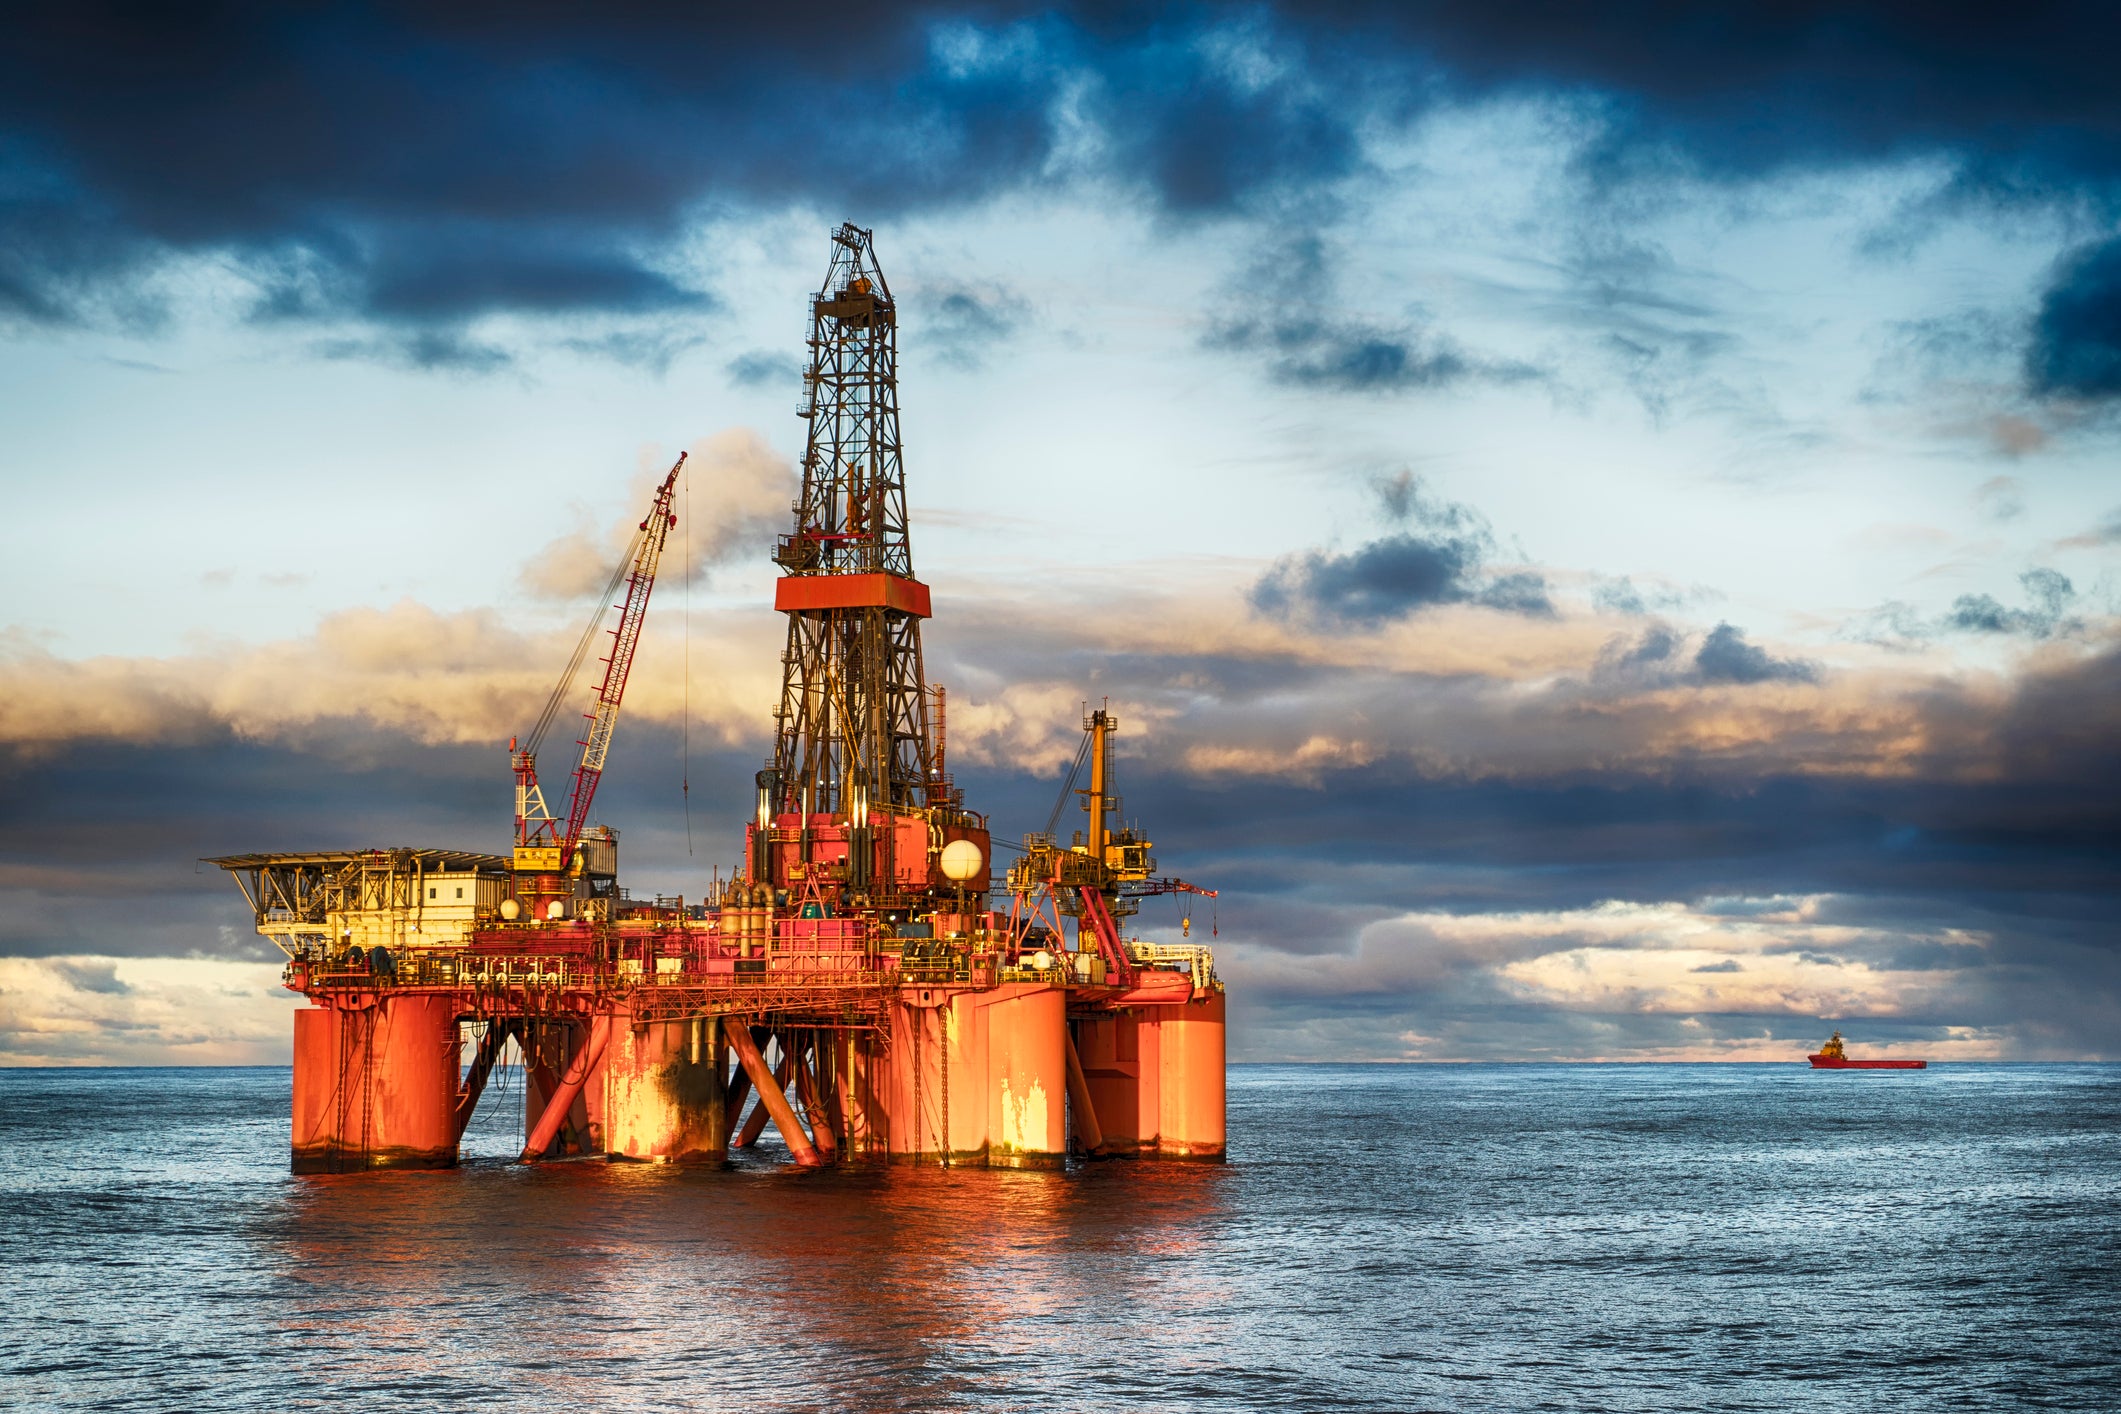 An Offshore Drilling Rig In The Ocean At Dusk Mobil Oil Drilling HD Wallpaper